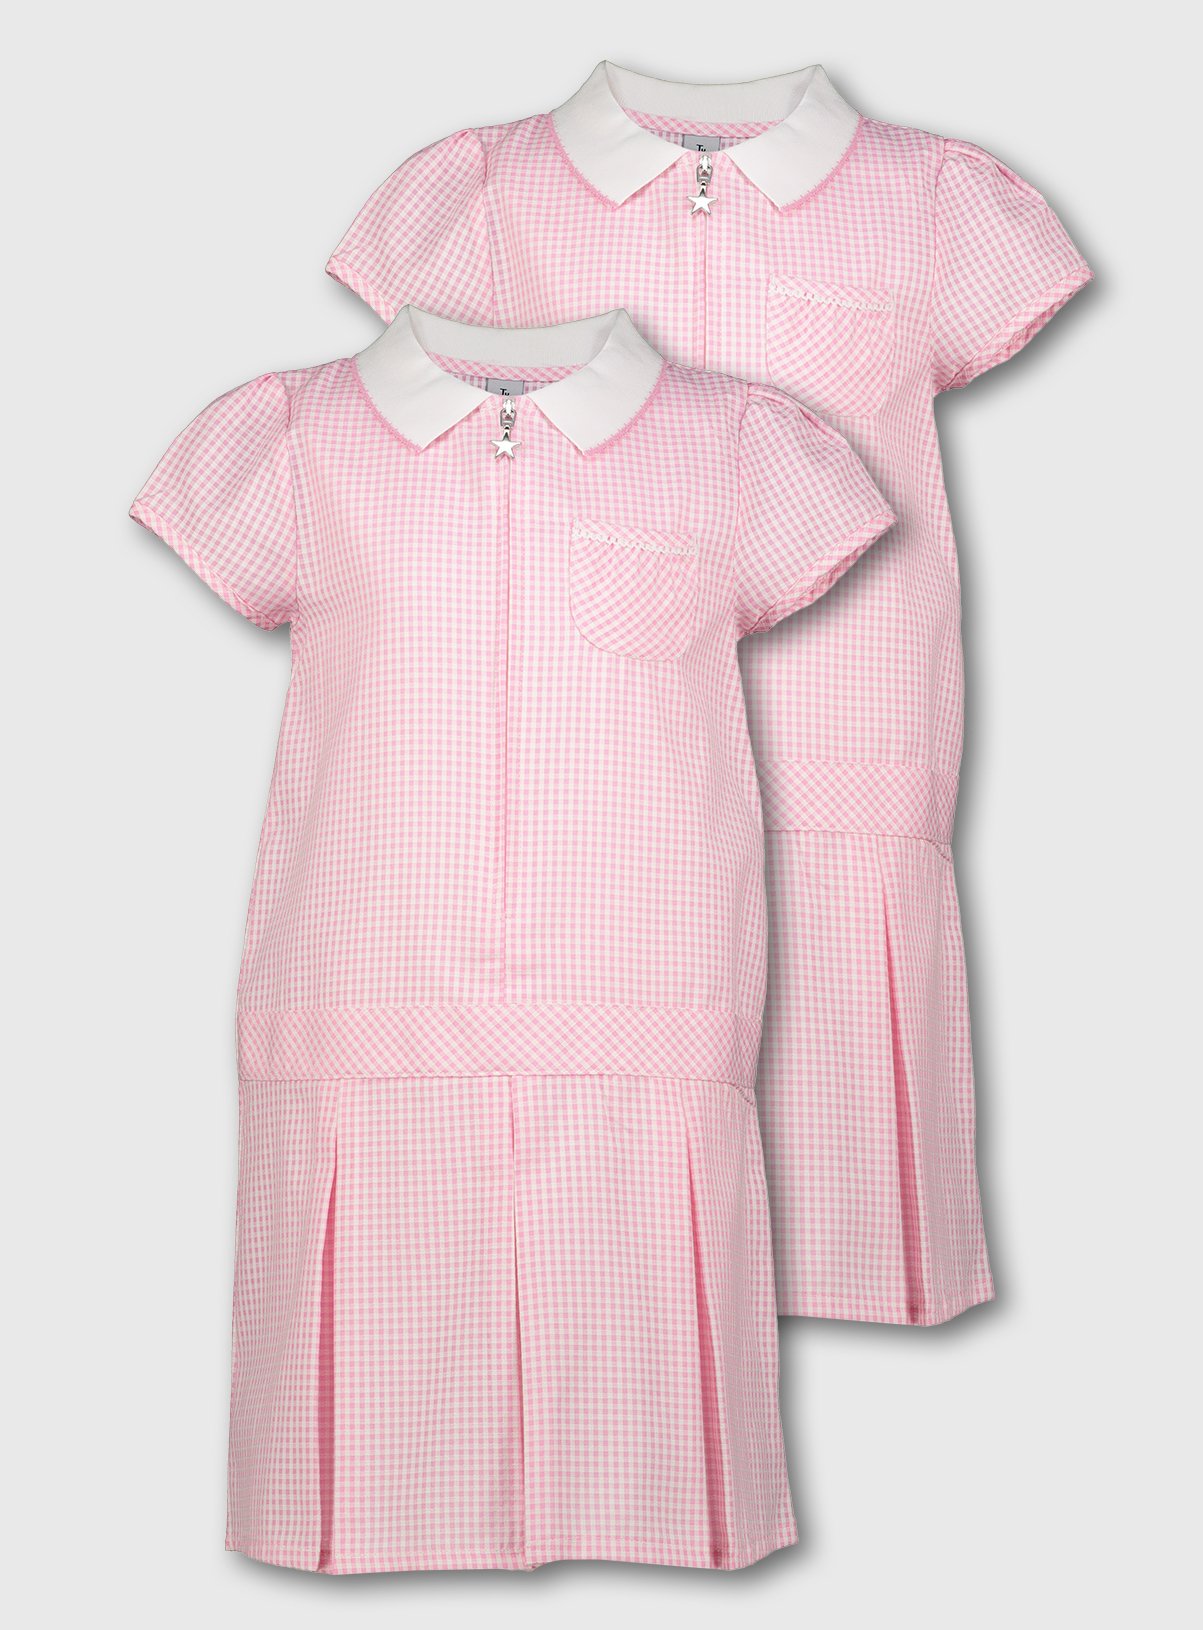 Pink Gingham Sporty Dresses 2 Pack Review